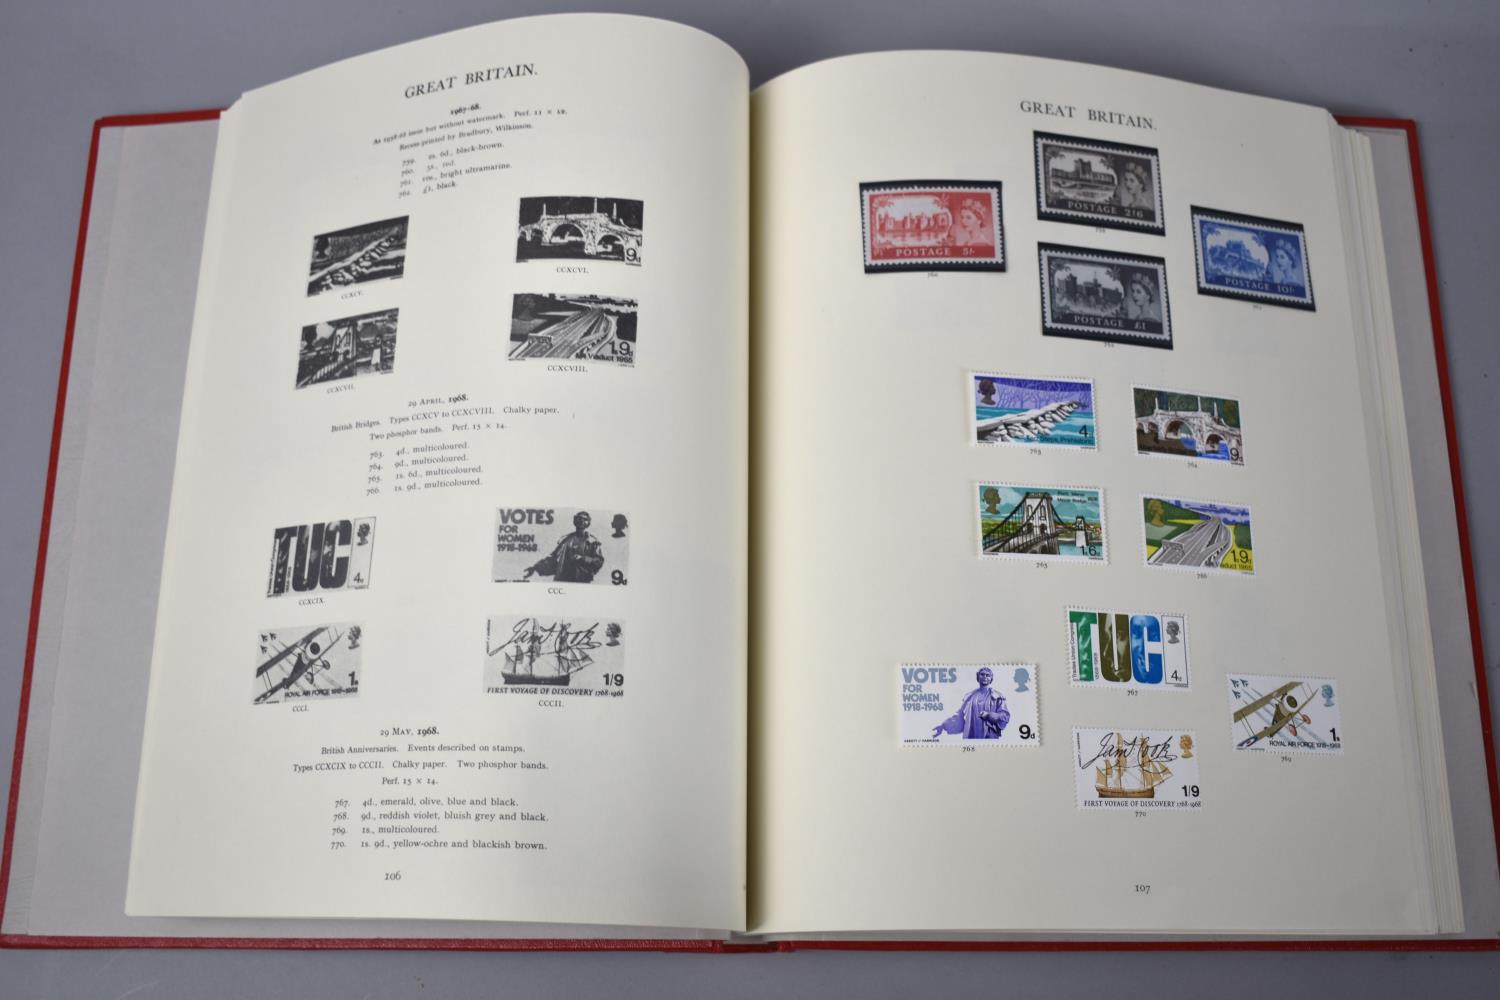 A Stanley Gibbons Windsor Stamp Album Containing an Almost Complete Run of QEII Commemorative Stamps - Image 2 of 5